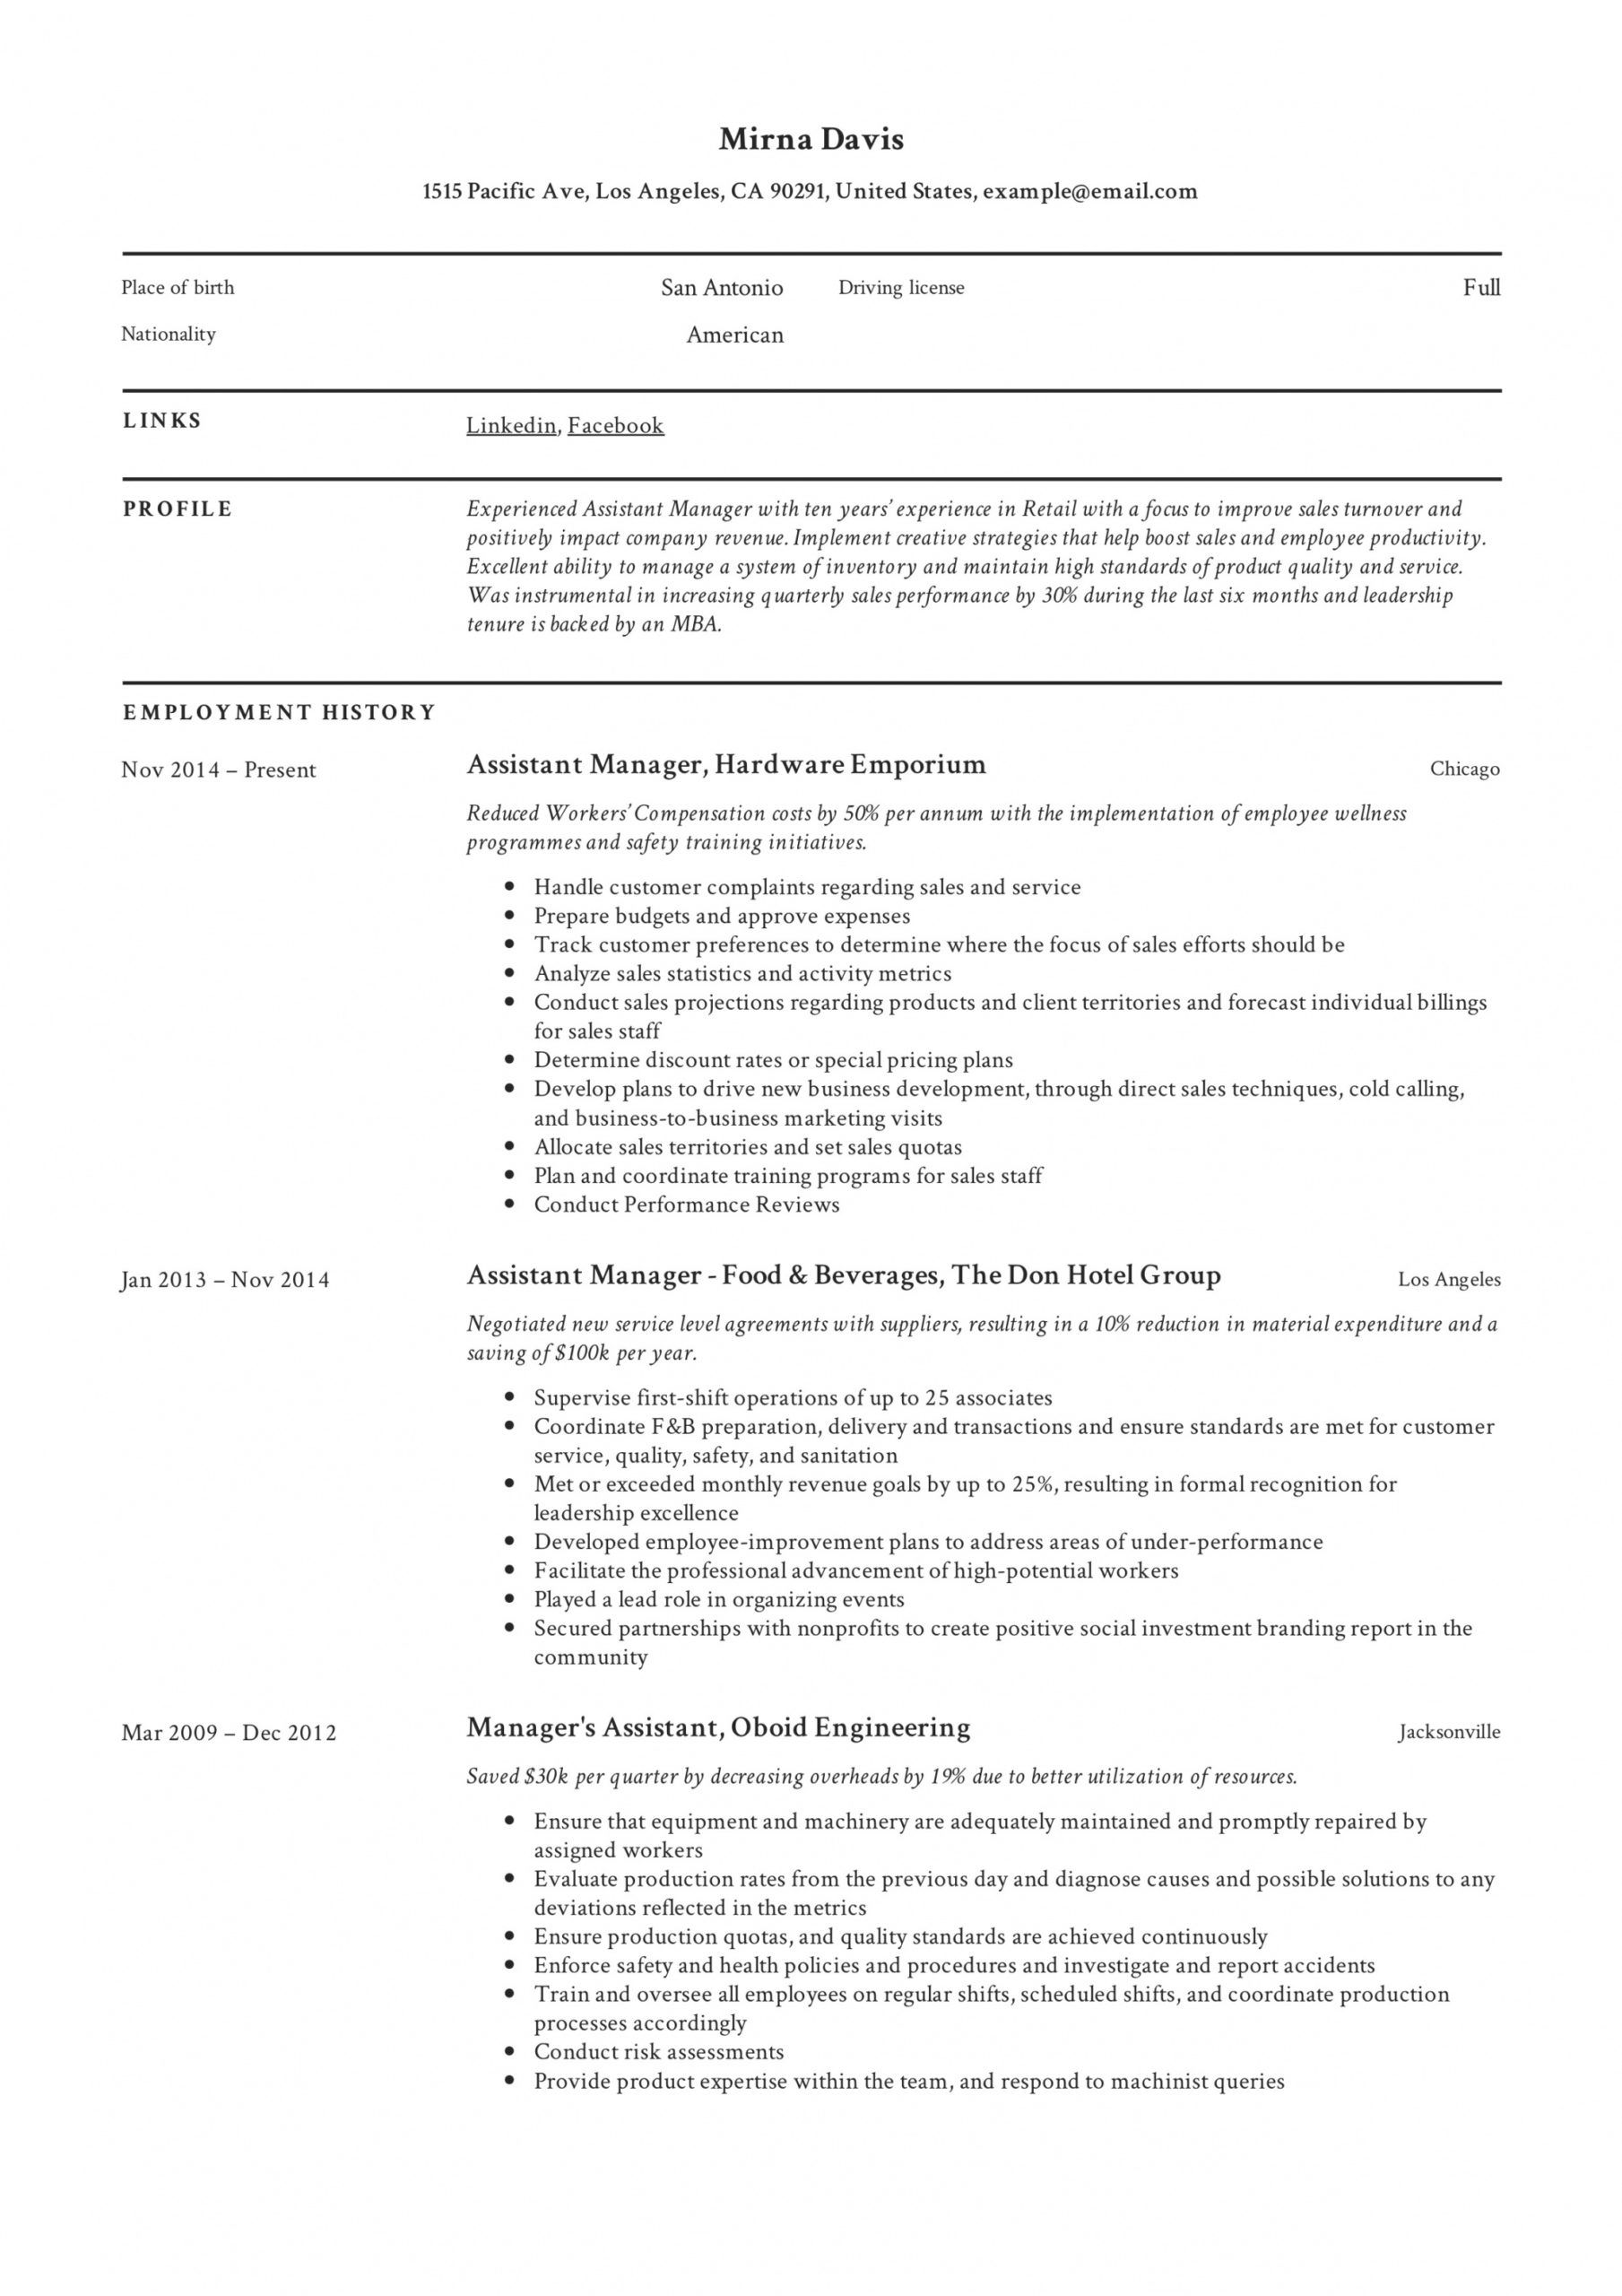 free assistant manager resume &amp;amp; writing guide  12 samples  pdf assistant manager job description template pdf